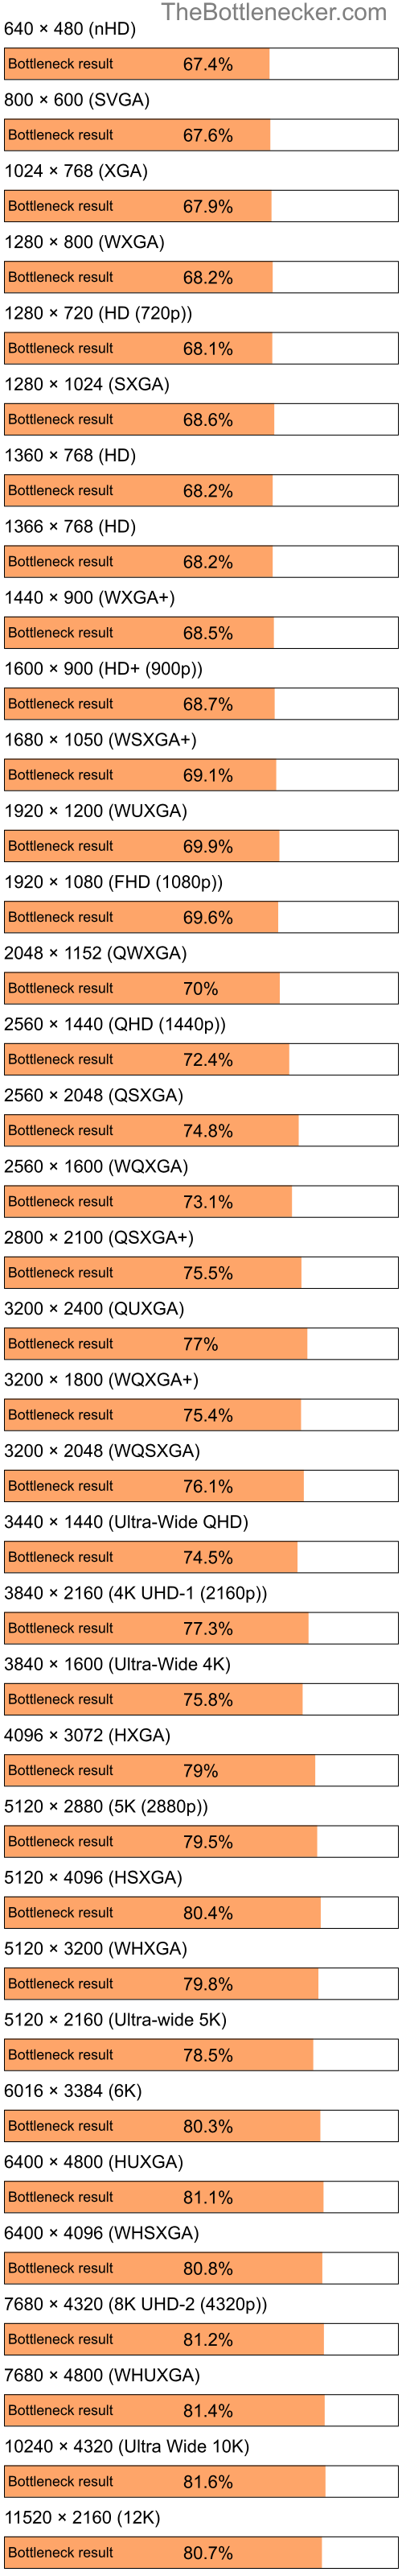 Bottleneck results by resolution for Intel Pentium 4 and NVIDIA GeForce 9100M G in General Tasks